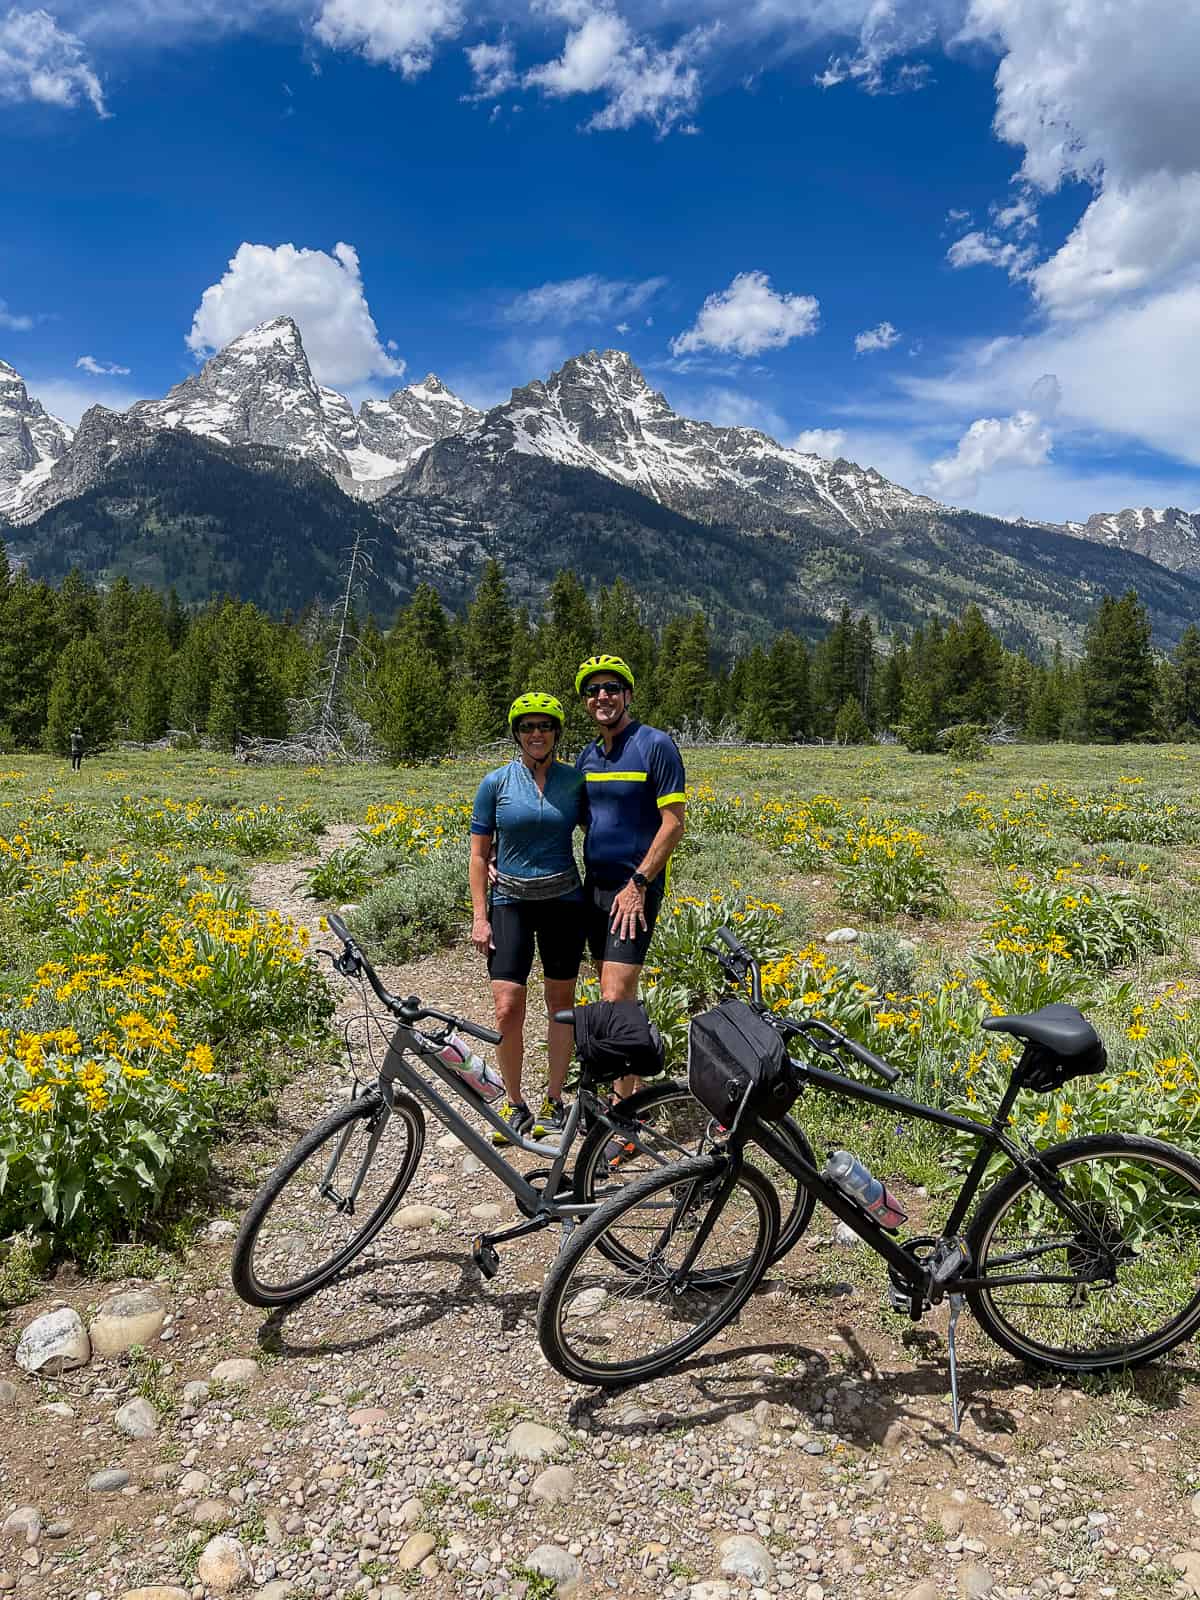 Mike and I with our bikes in front of the beautiful mountains.